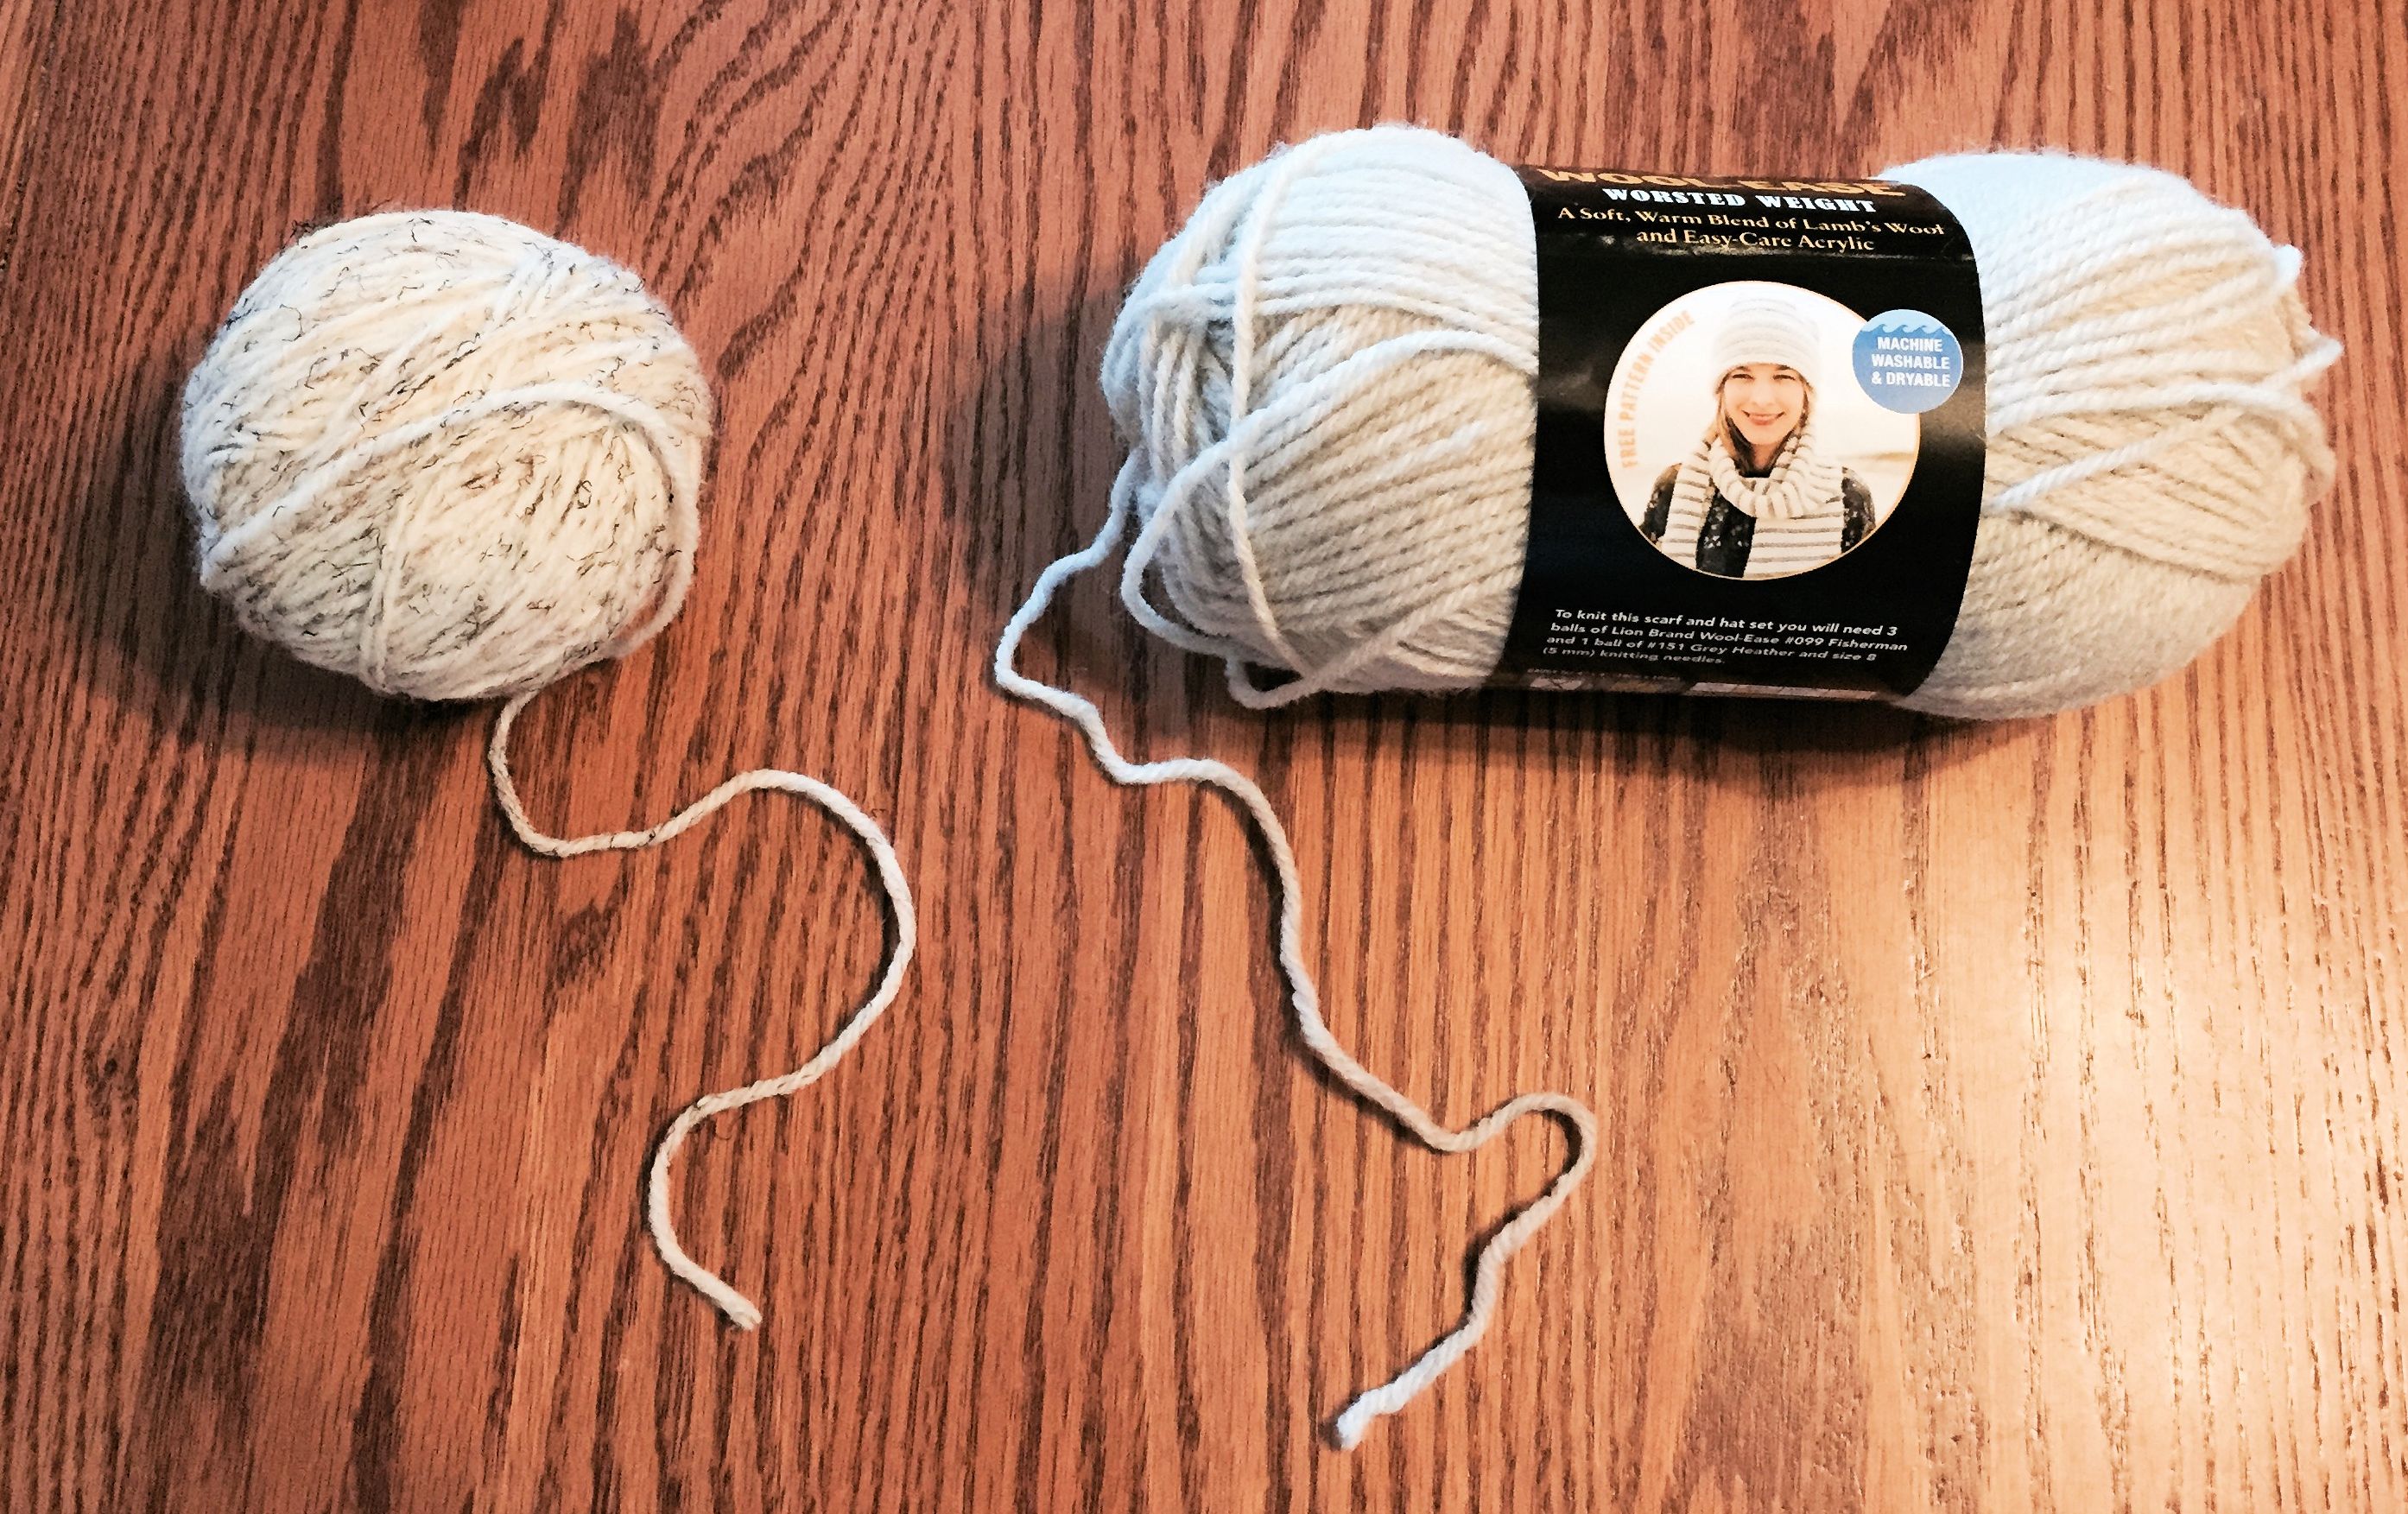 What is the best way to use a skein of yarn? Put-ups for tapestry